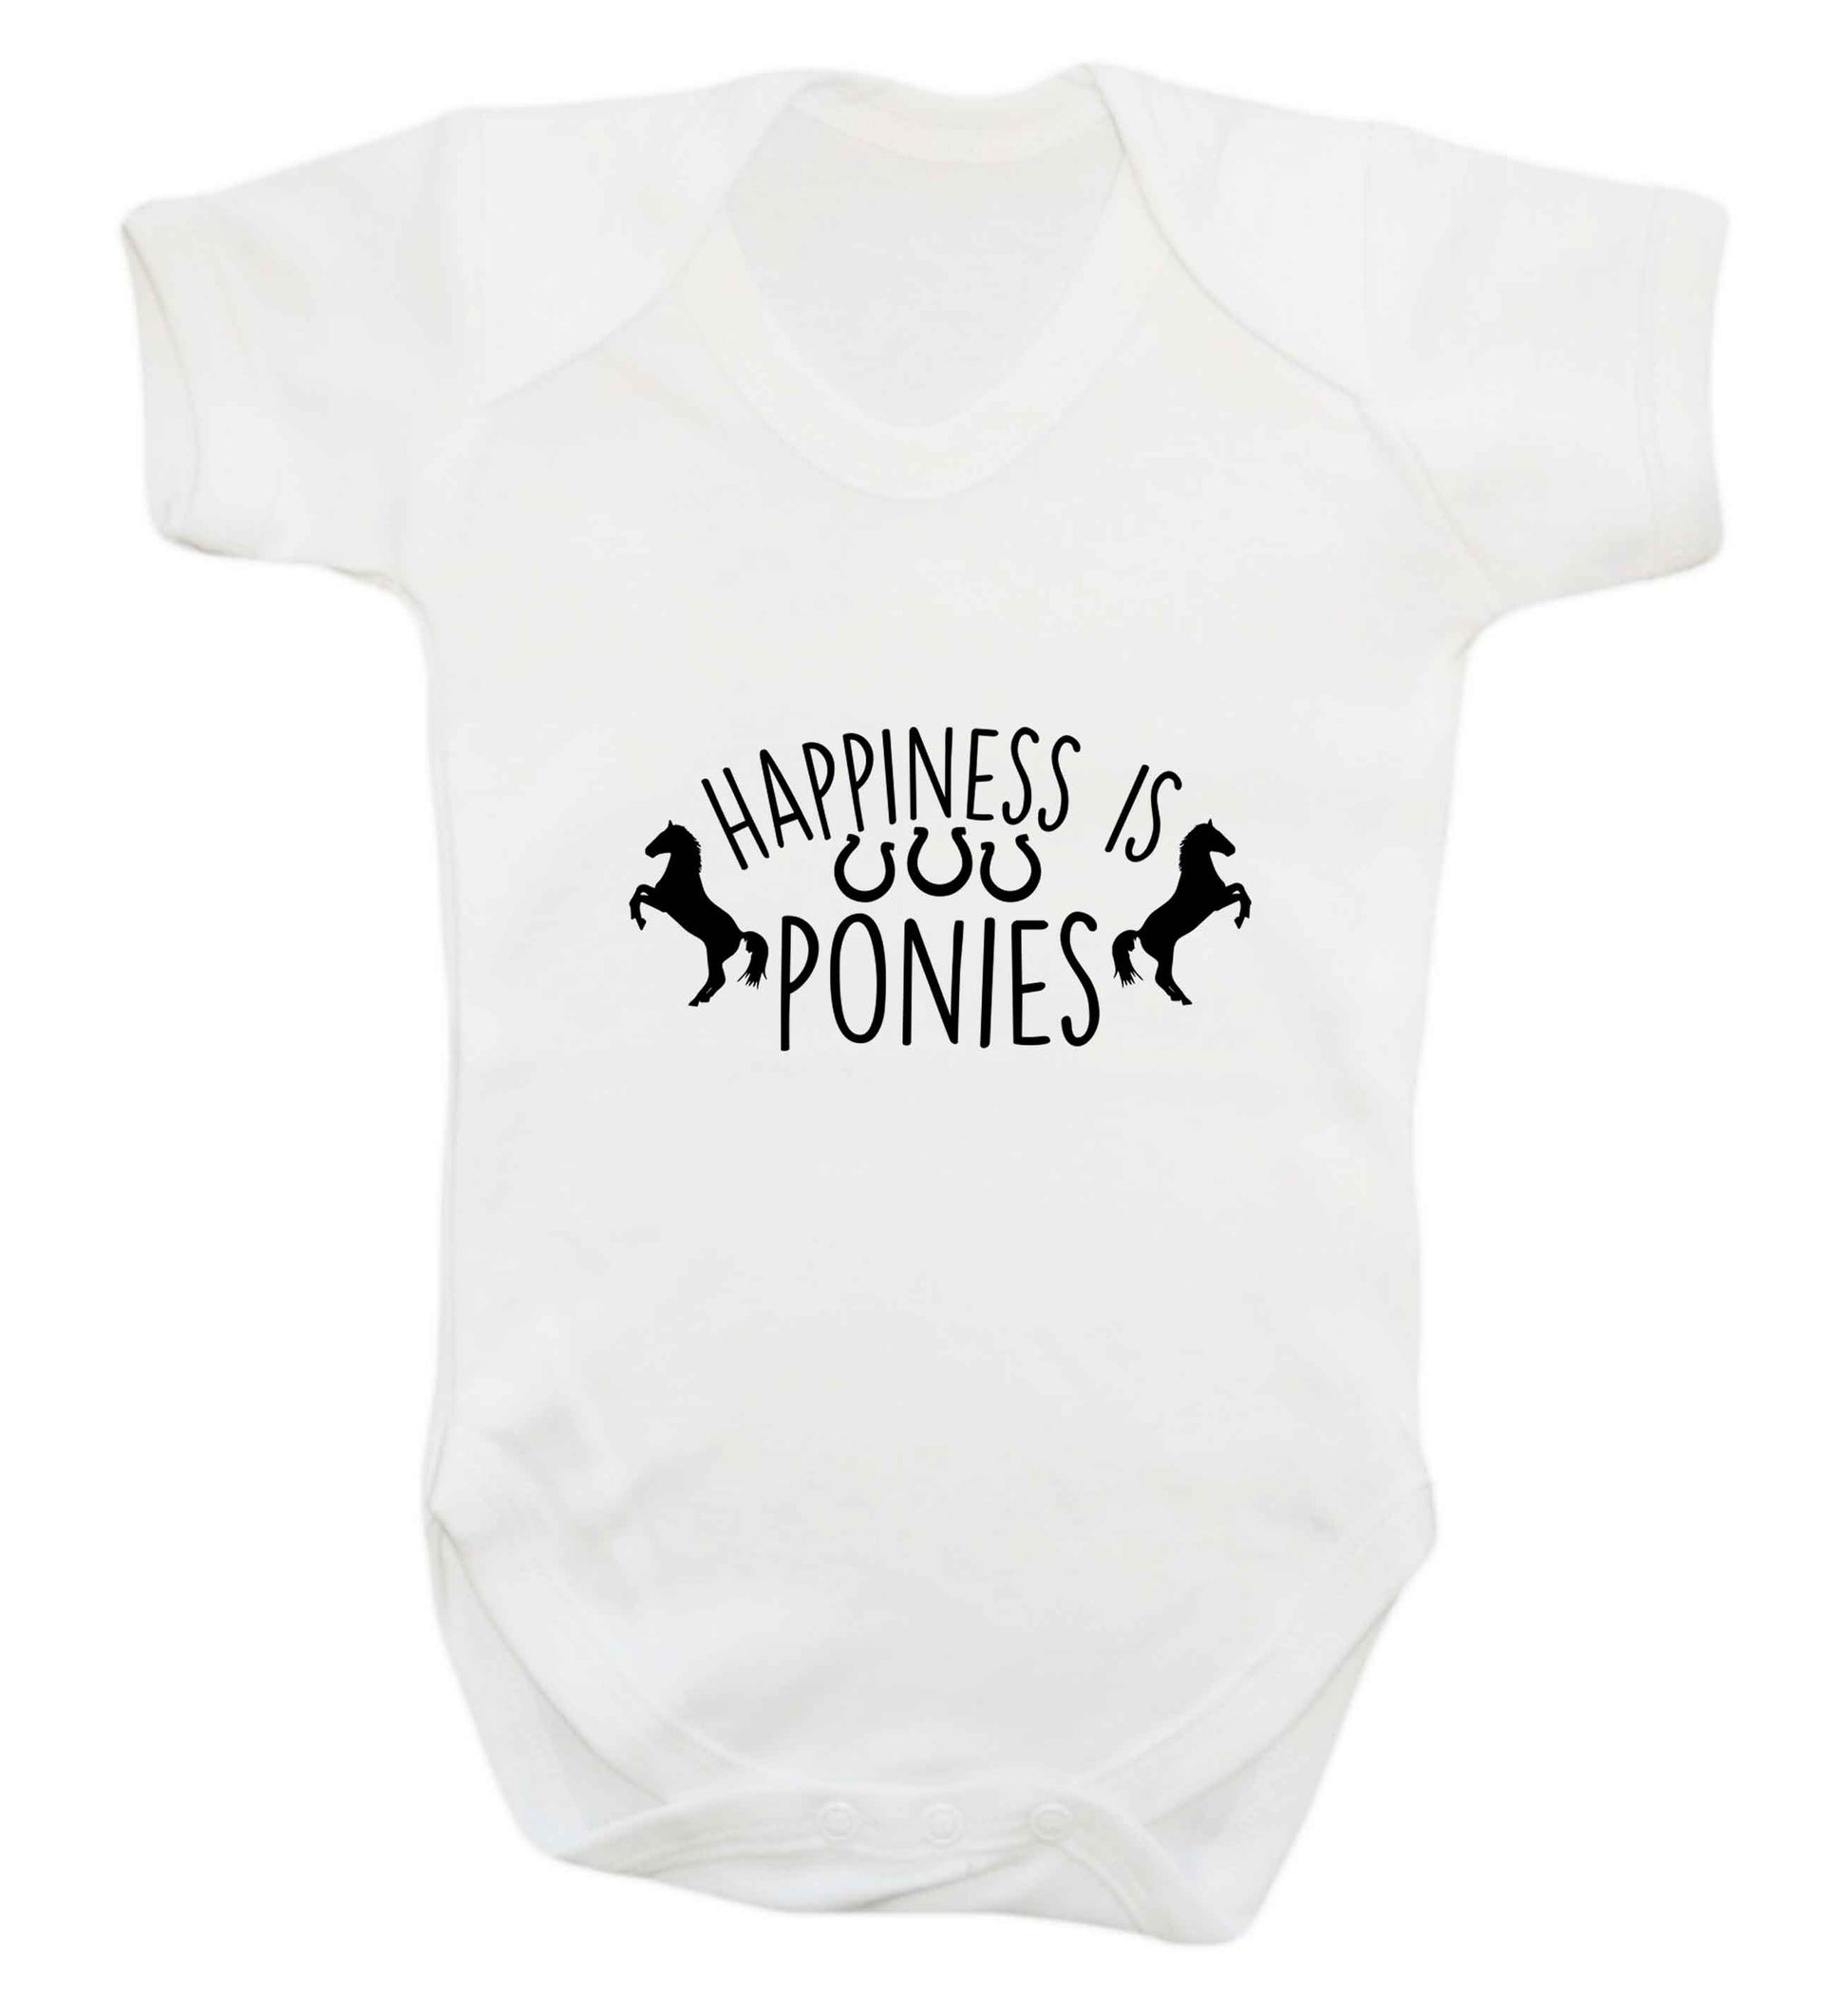 Happiness is ponies baby vest white 18-24 months